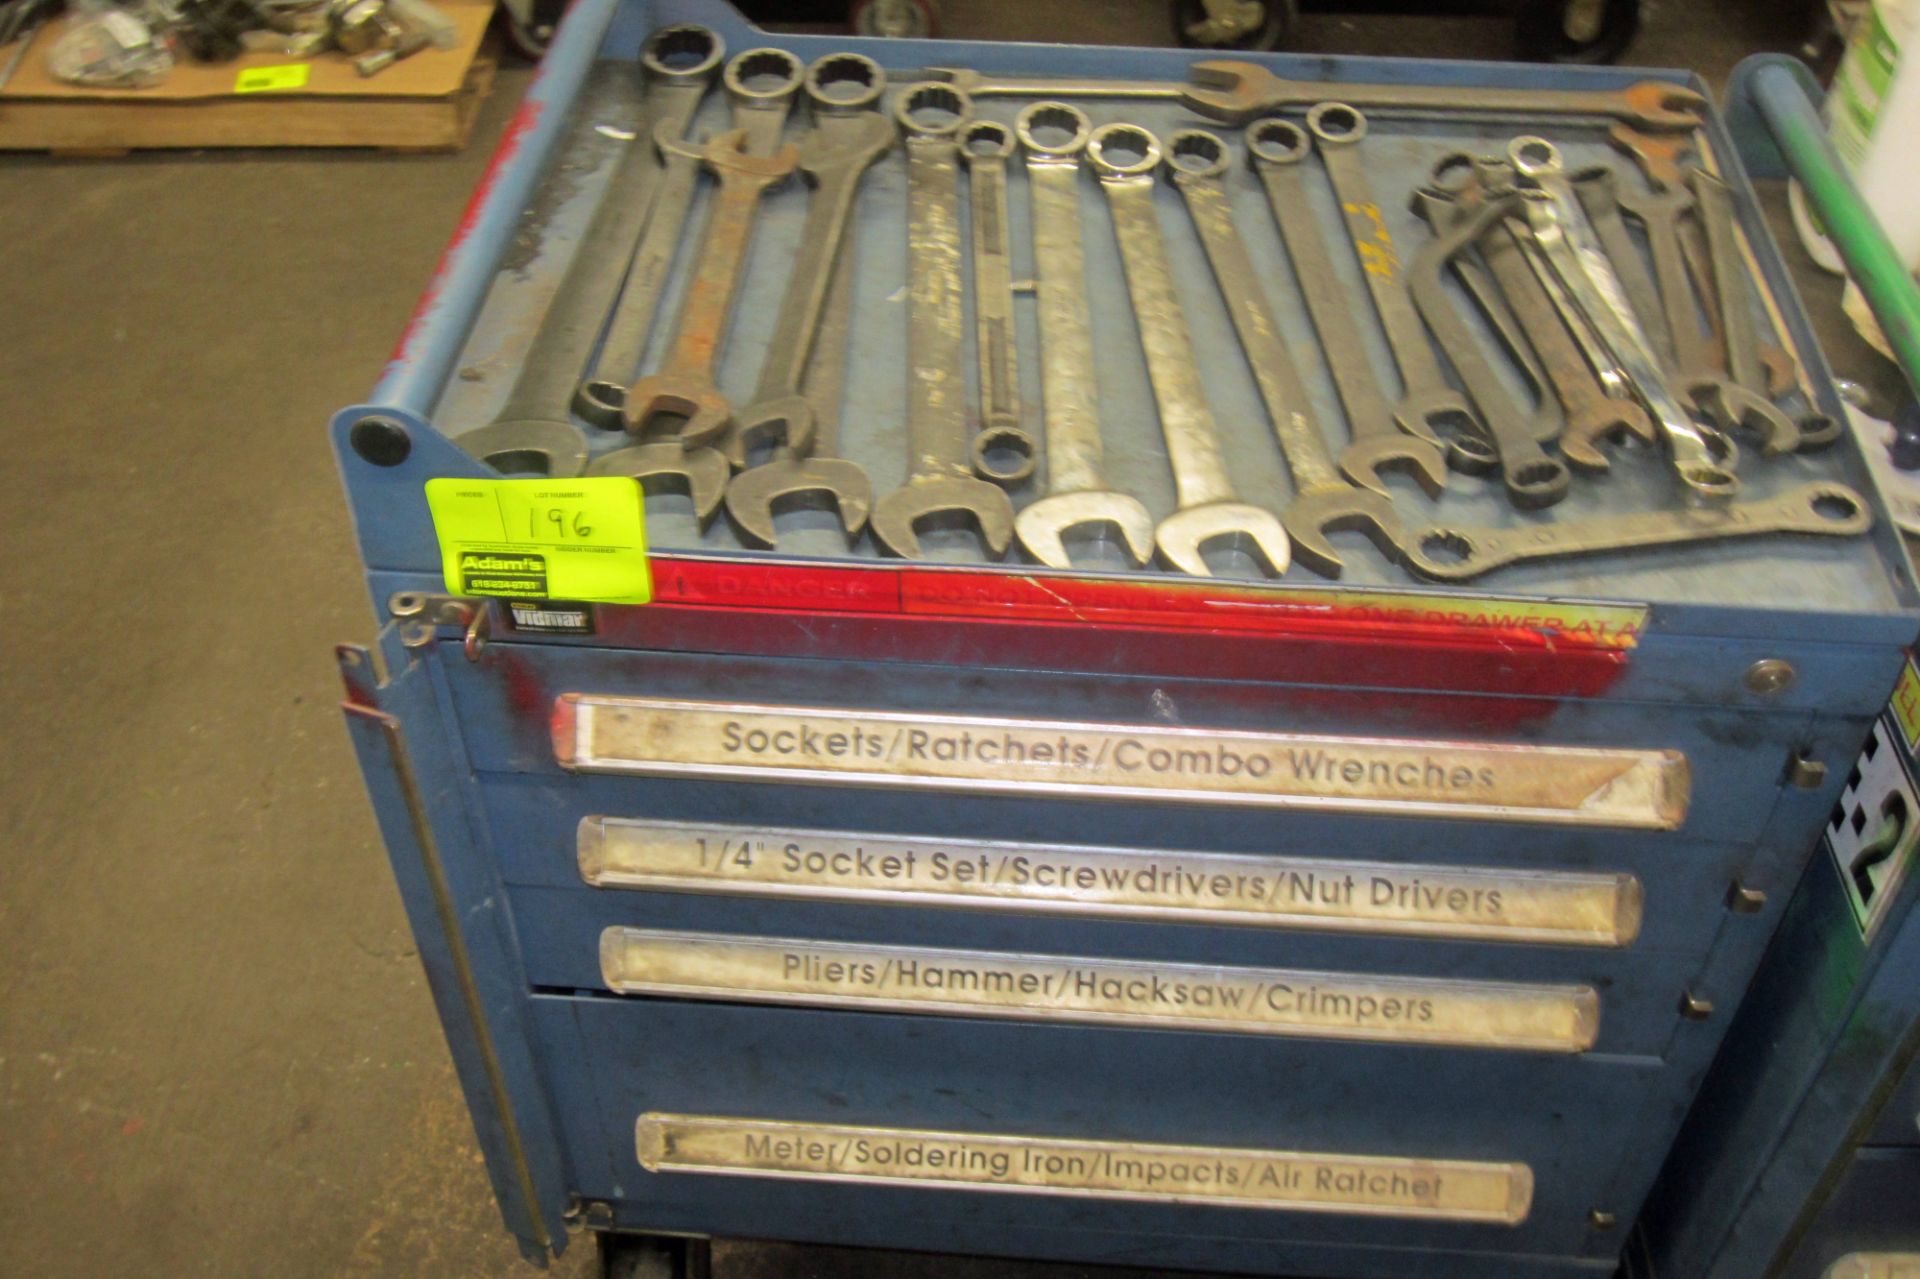 BLUE VIDMAR 7 DRAWER TOOL BOX - WITH SNAPON WRENCHES